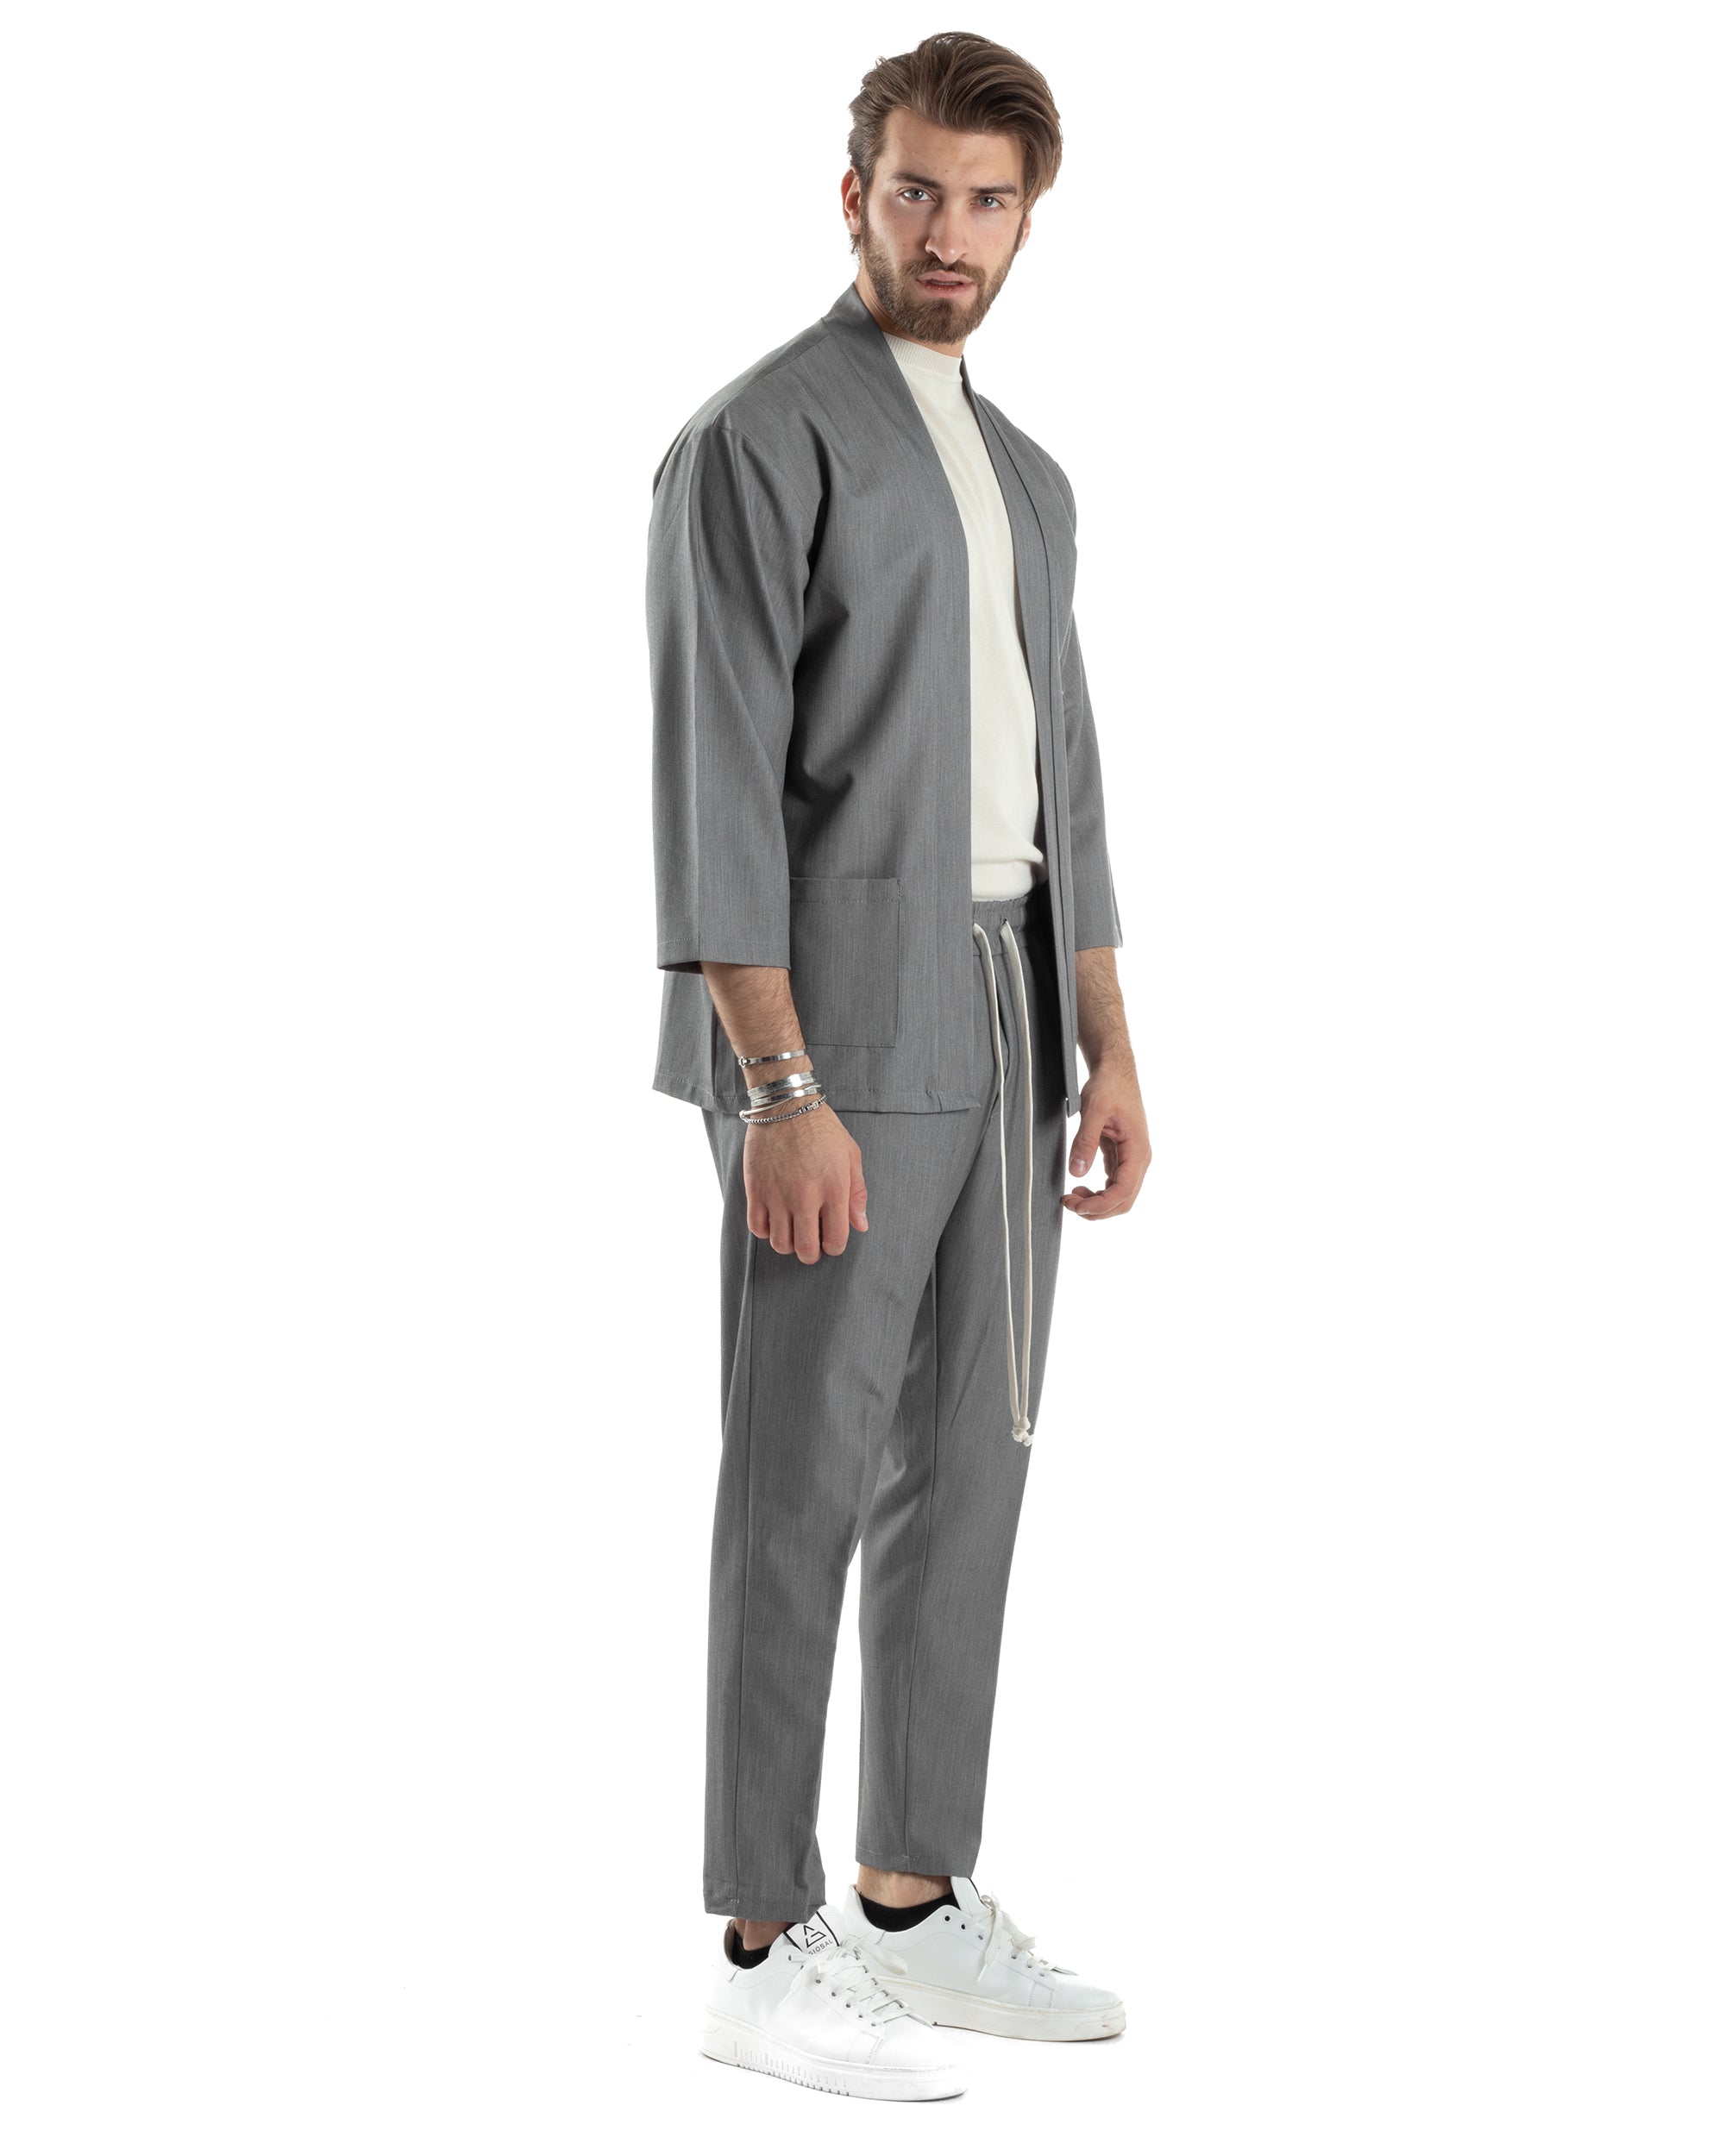 Complete Coordinated Set for Men Viscose Shirt With Collar Trousers Outfit Black GIOSAL-OU2389A